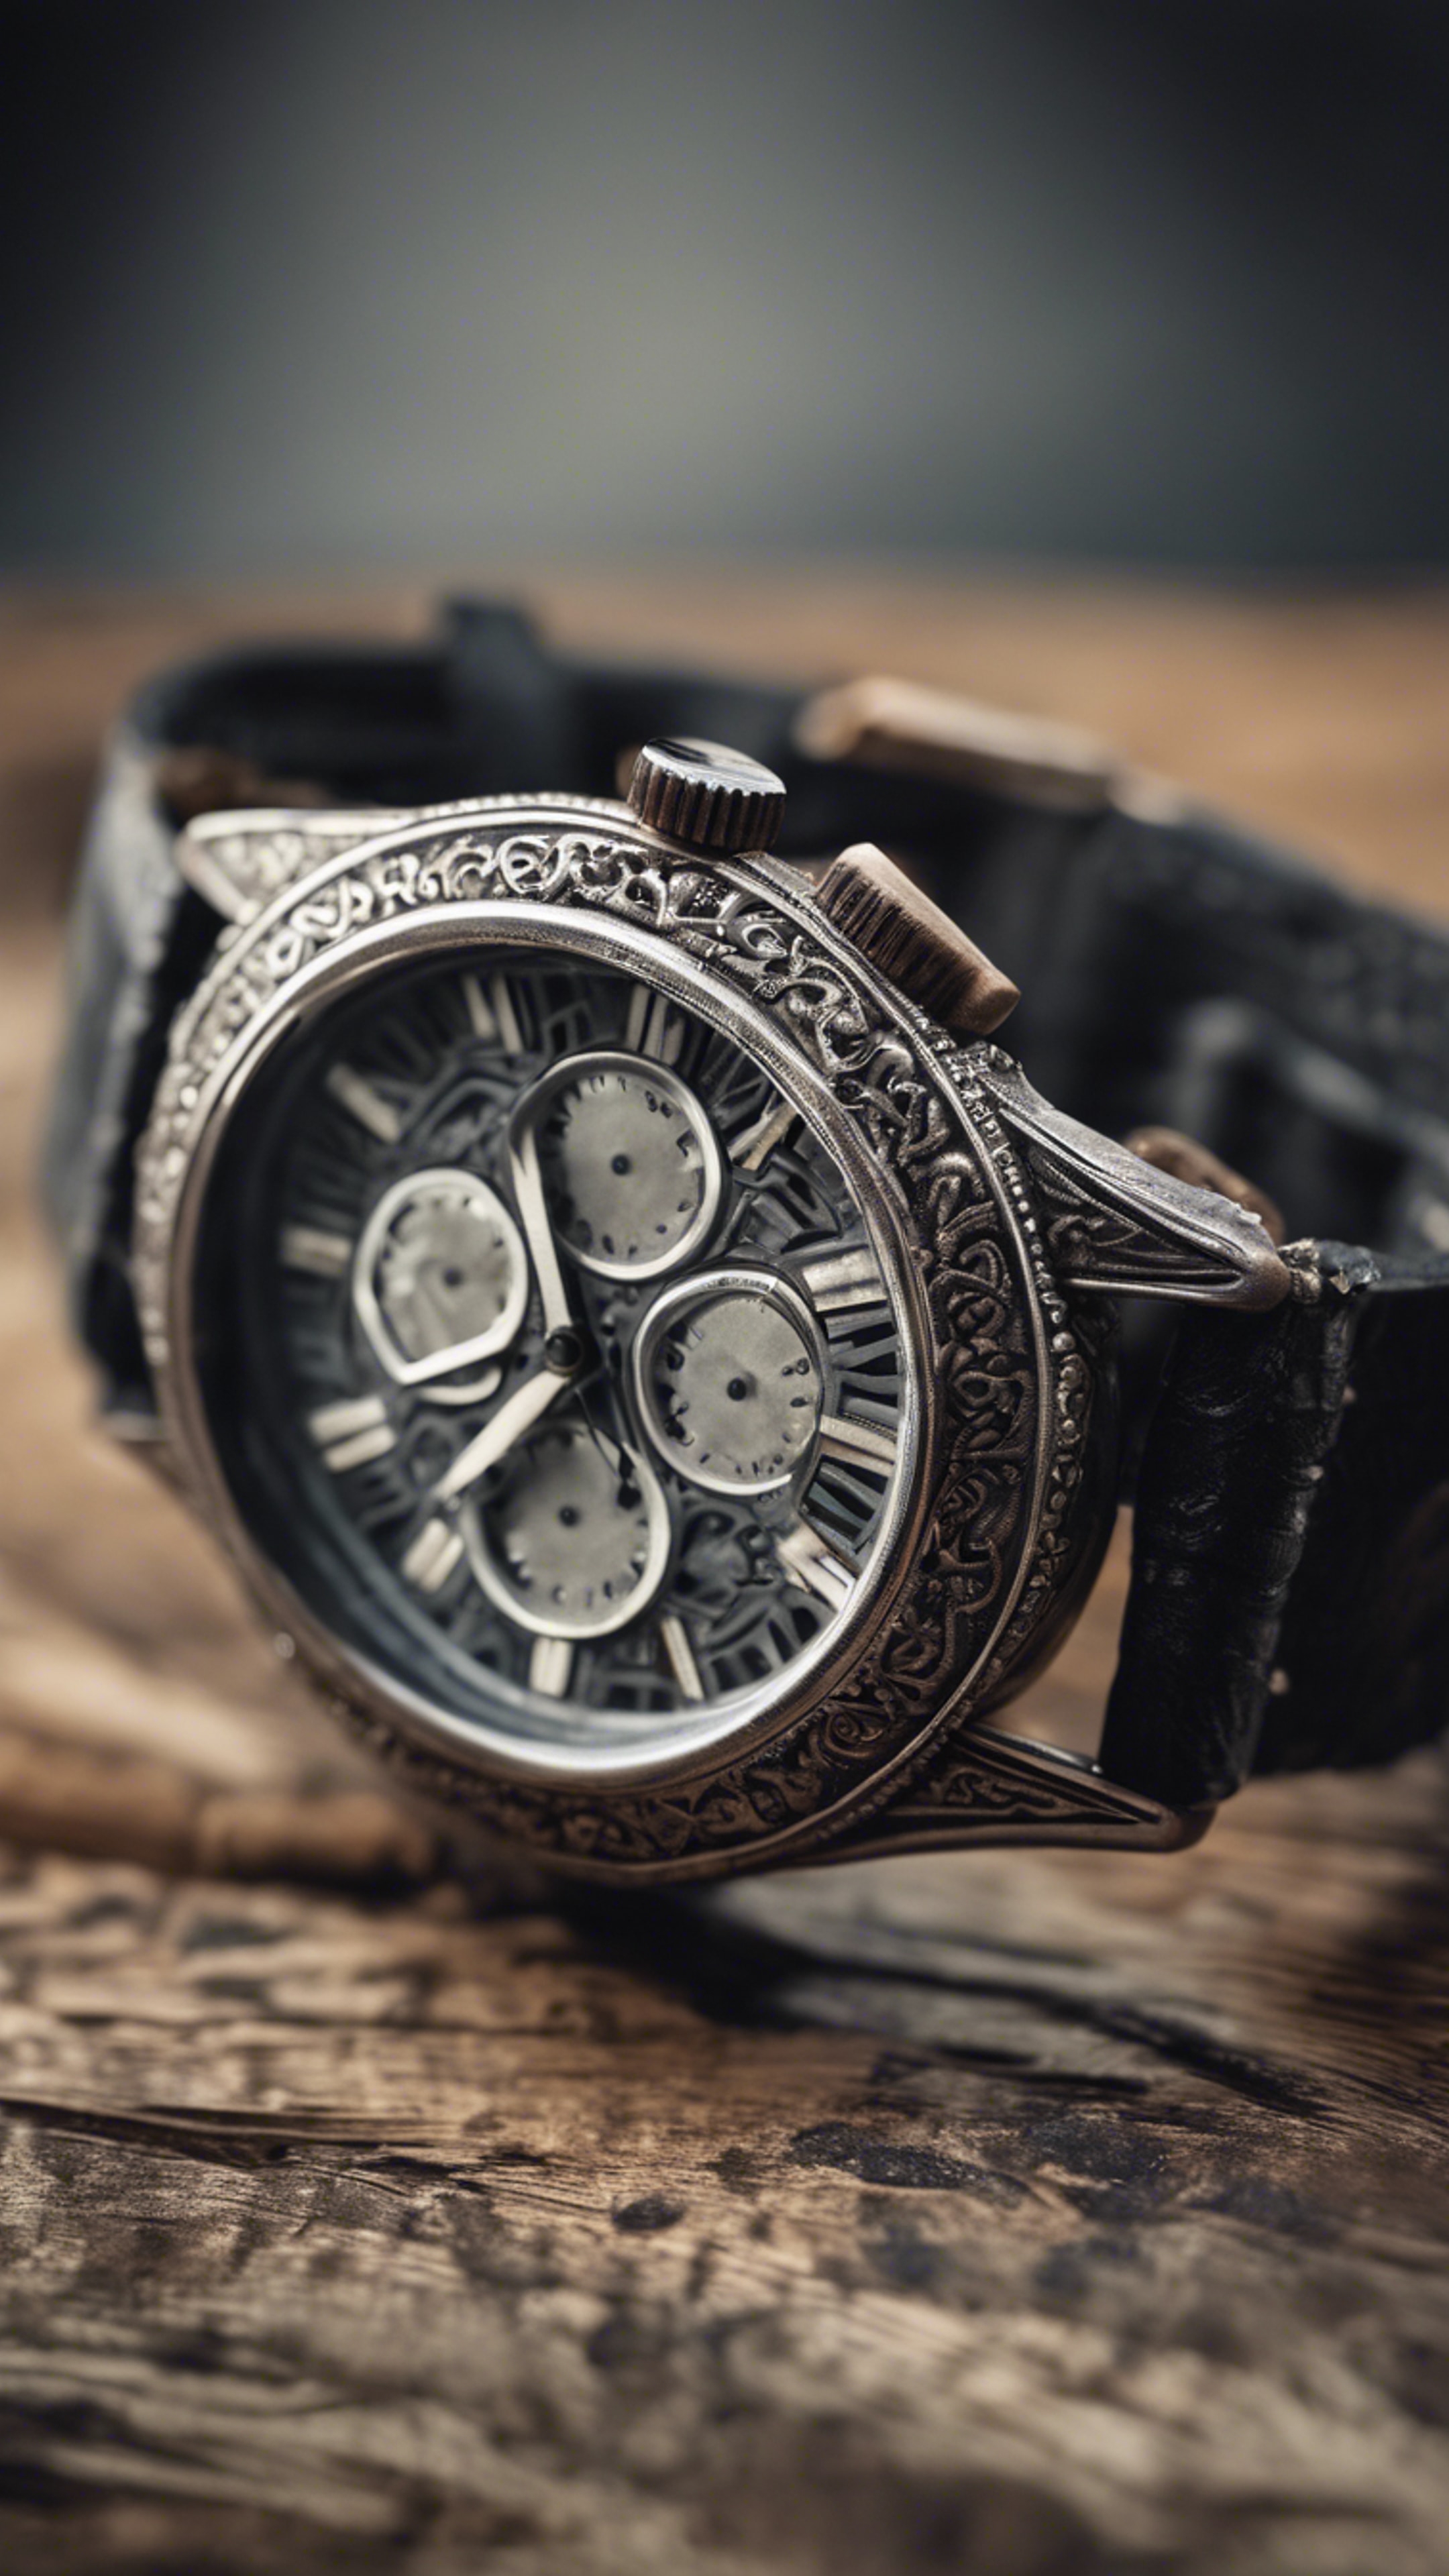 An antique, rustic, black and gray wristwatch with intricate details in its design. Tapetai[fa36b50287764cf98f6d]